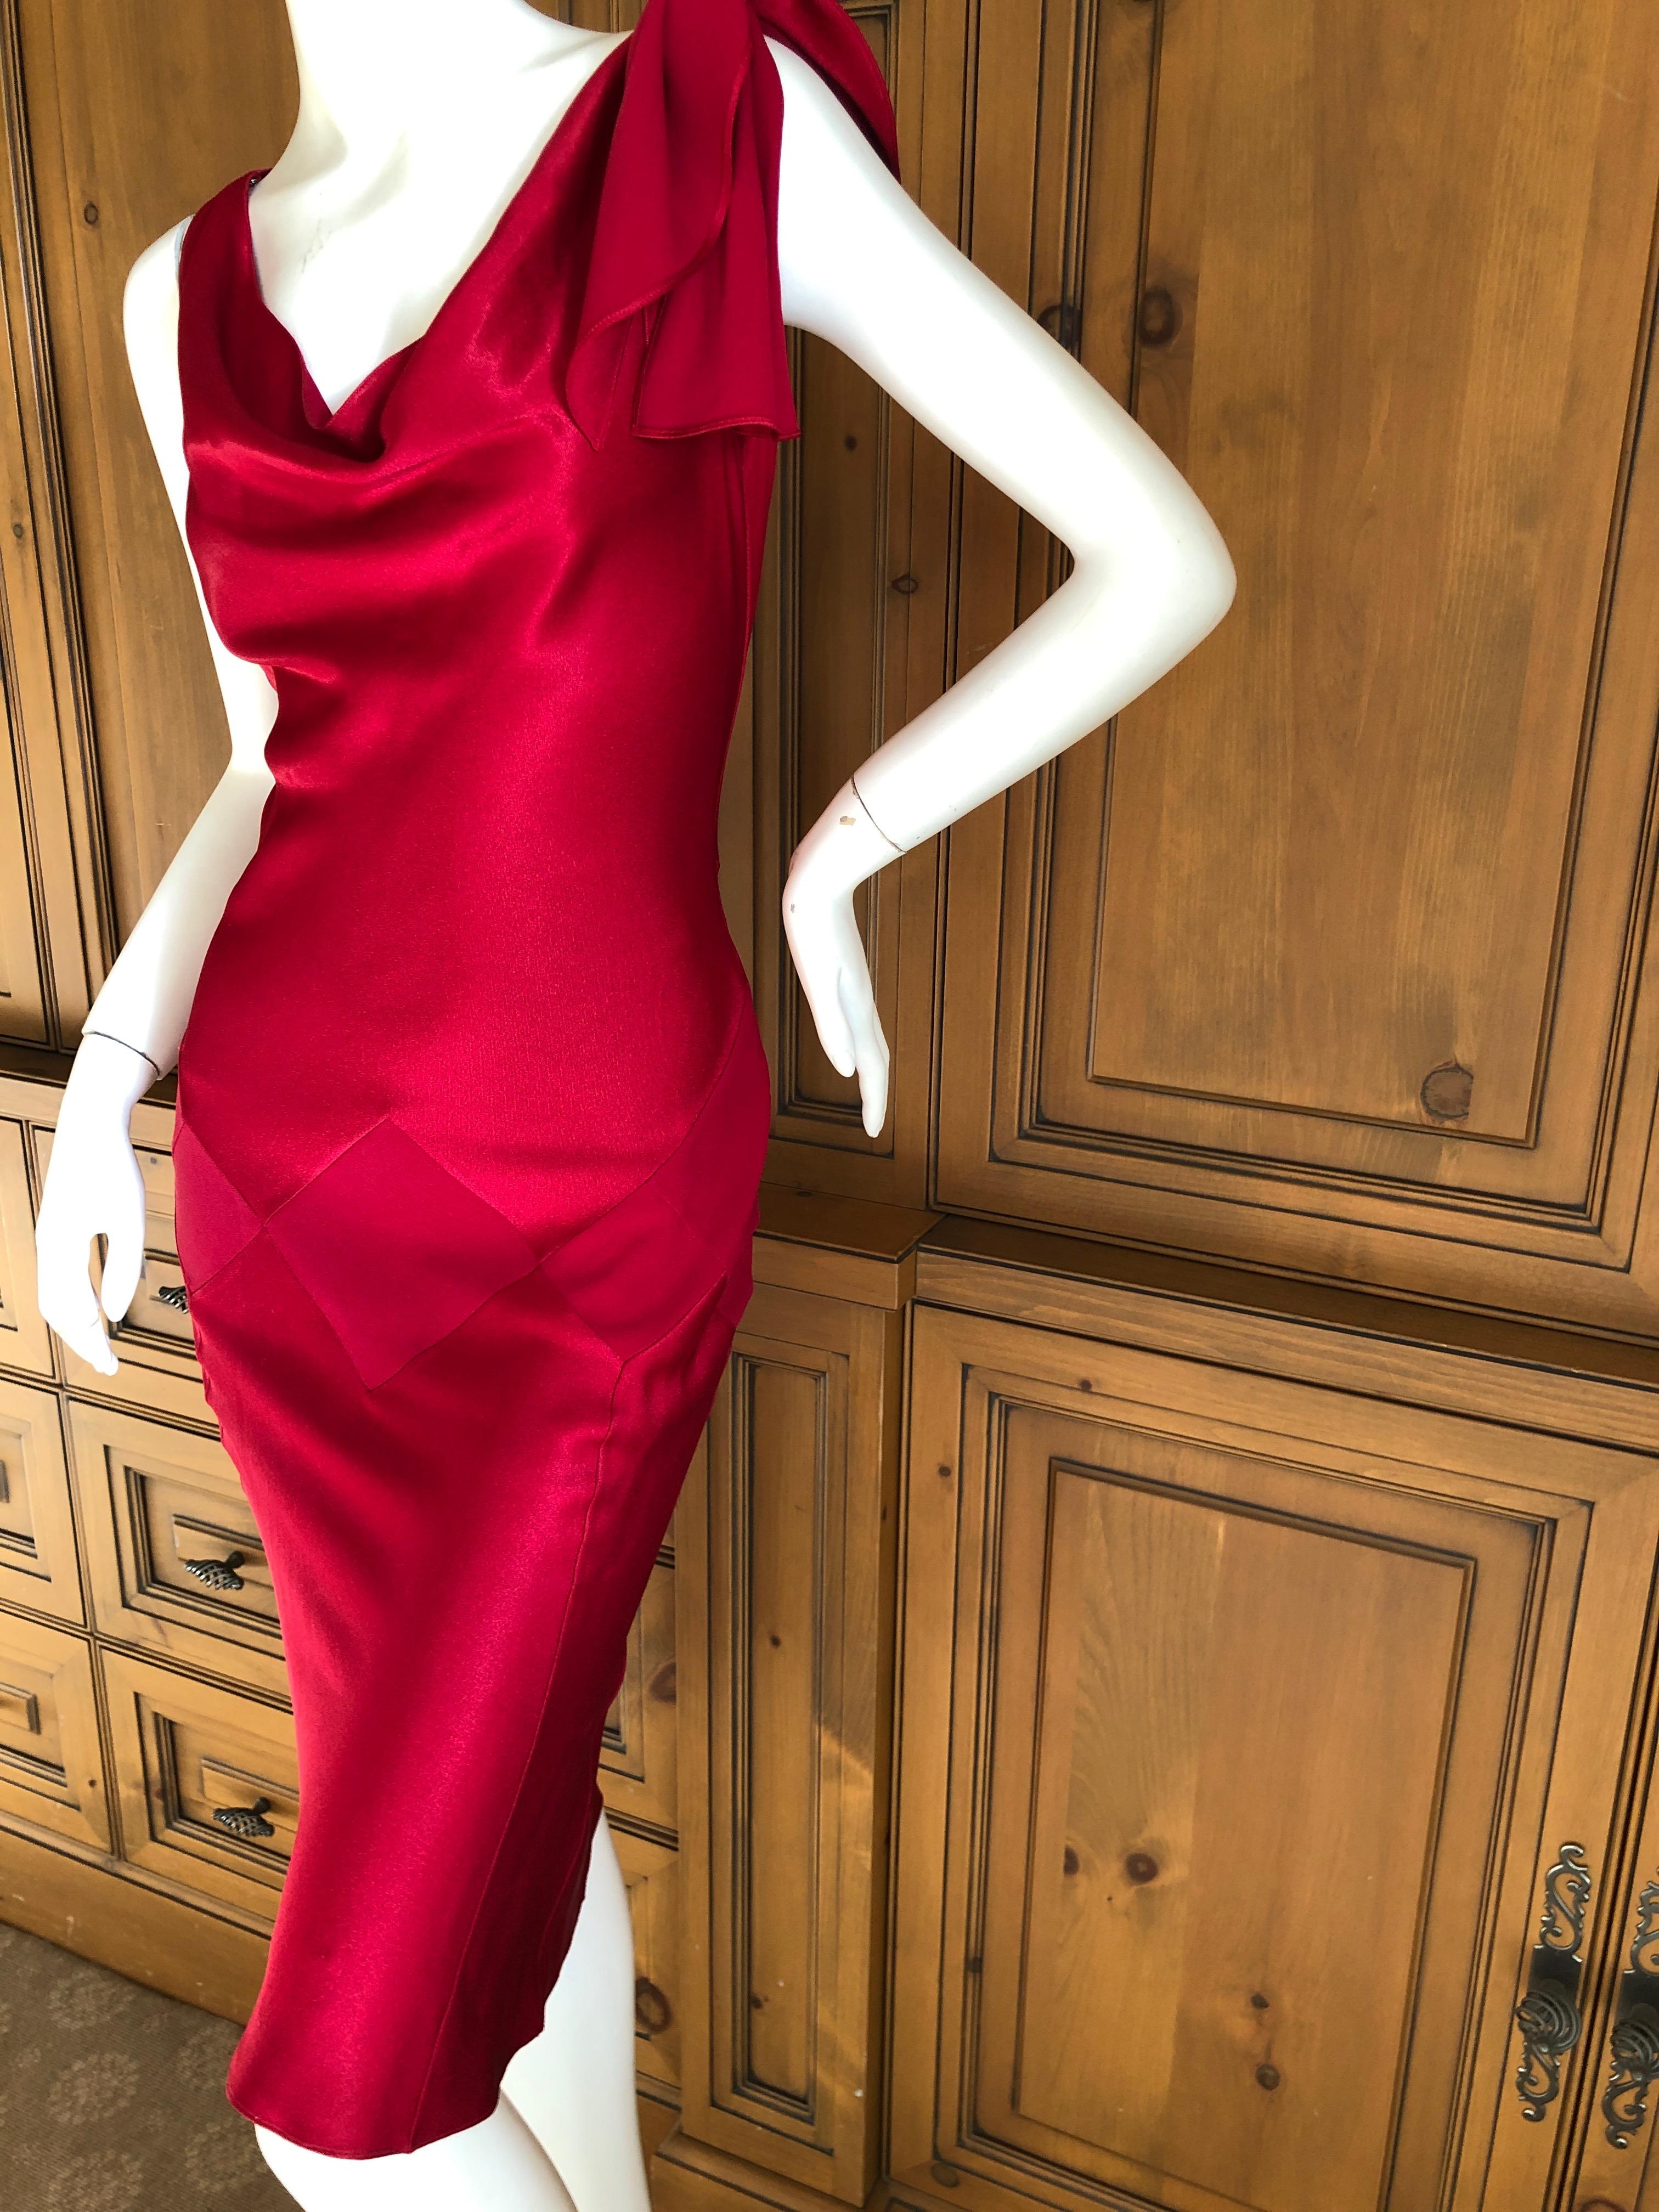 John Galliano Bias Cut Diamond Pattern 1990's Red Cocktail Dress
So pretty, nobody cut's like Galliano, this clings in just the right places.
Size 38 French  4 US
 Bust 39